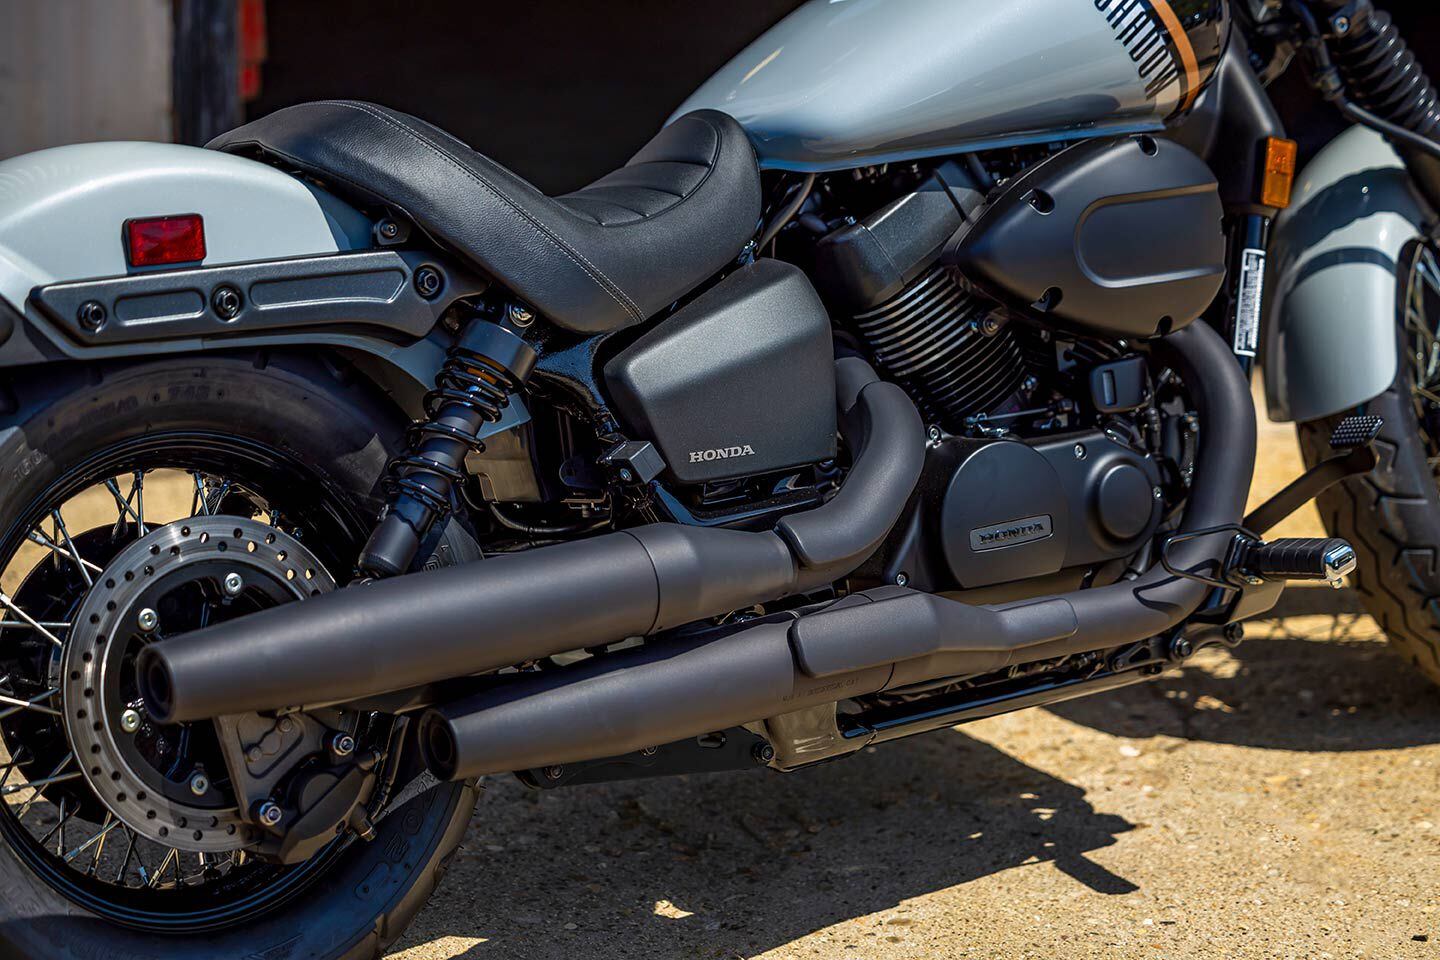 The Honda Shadow Phantom is blacked out from the cylinder head covers to the exhausts.